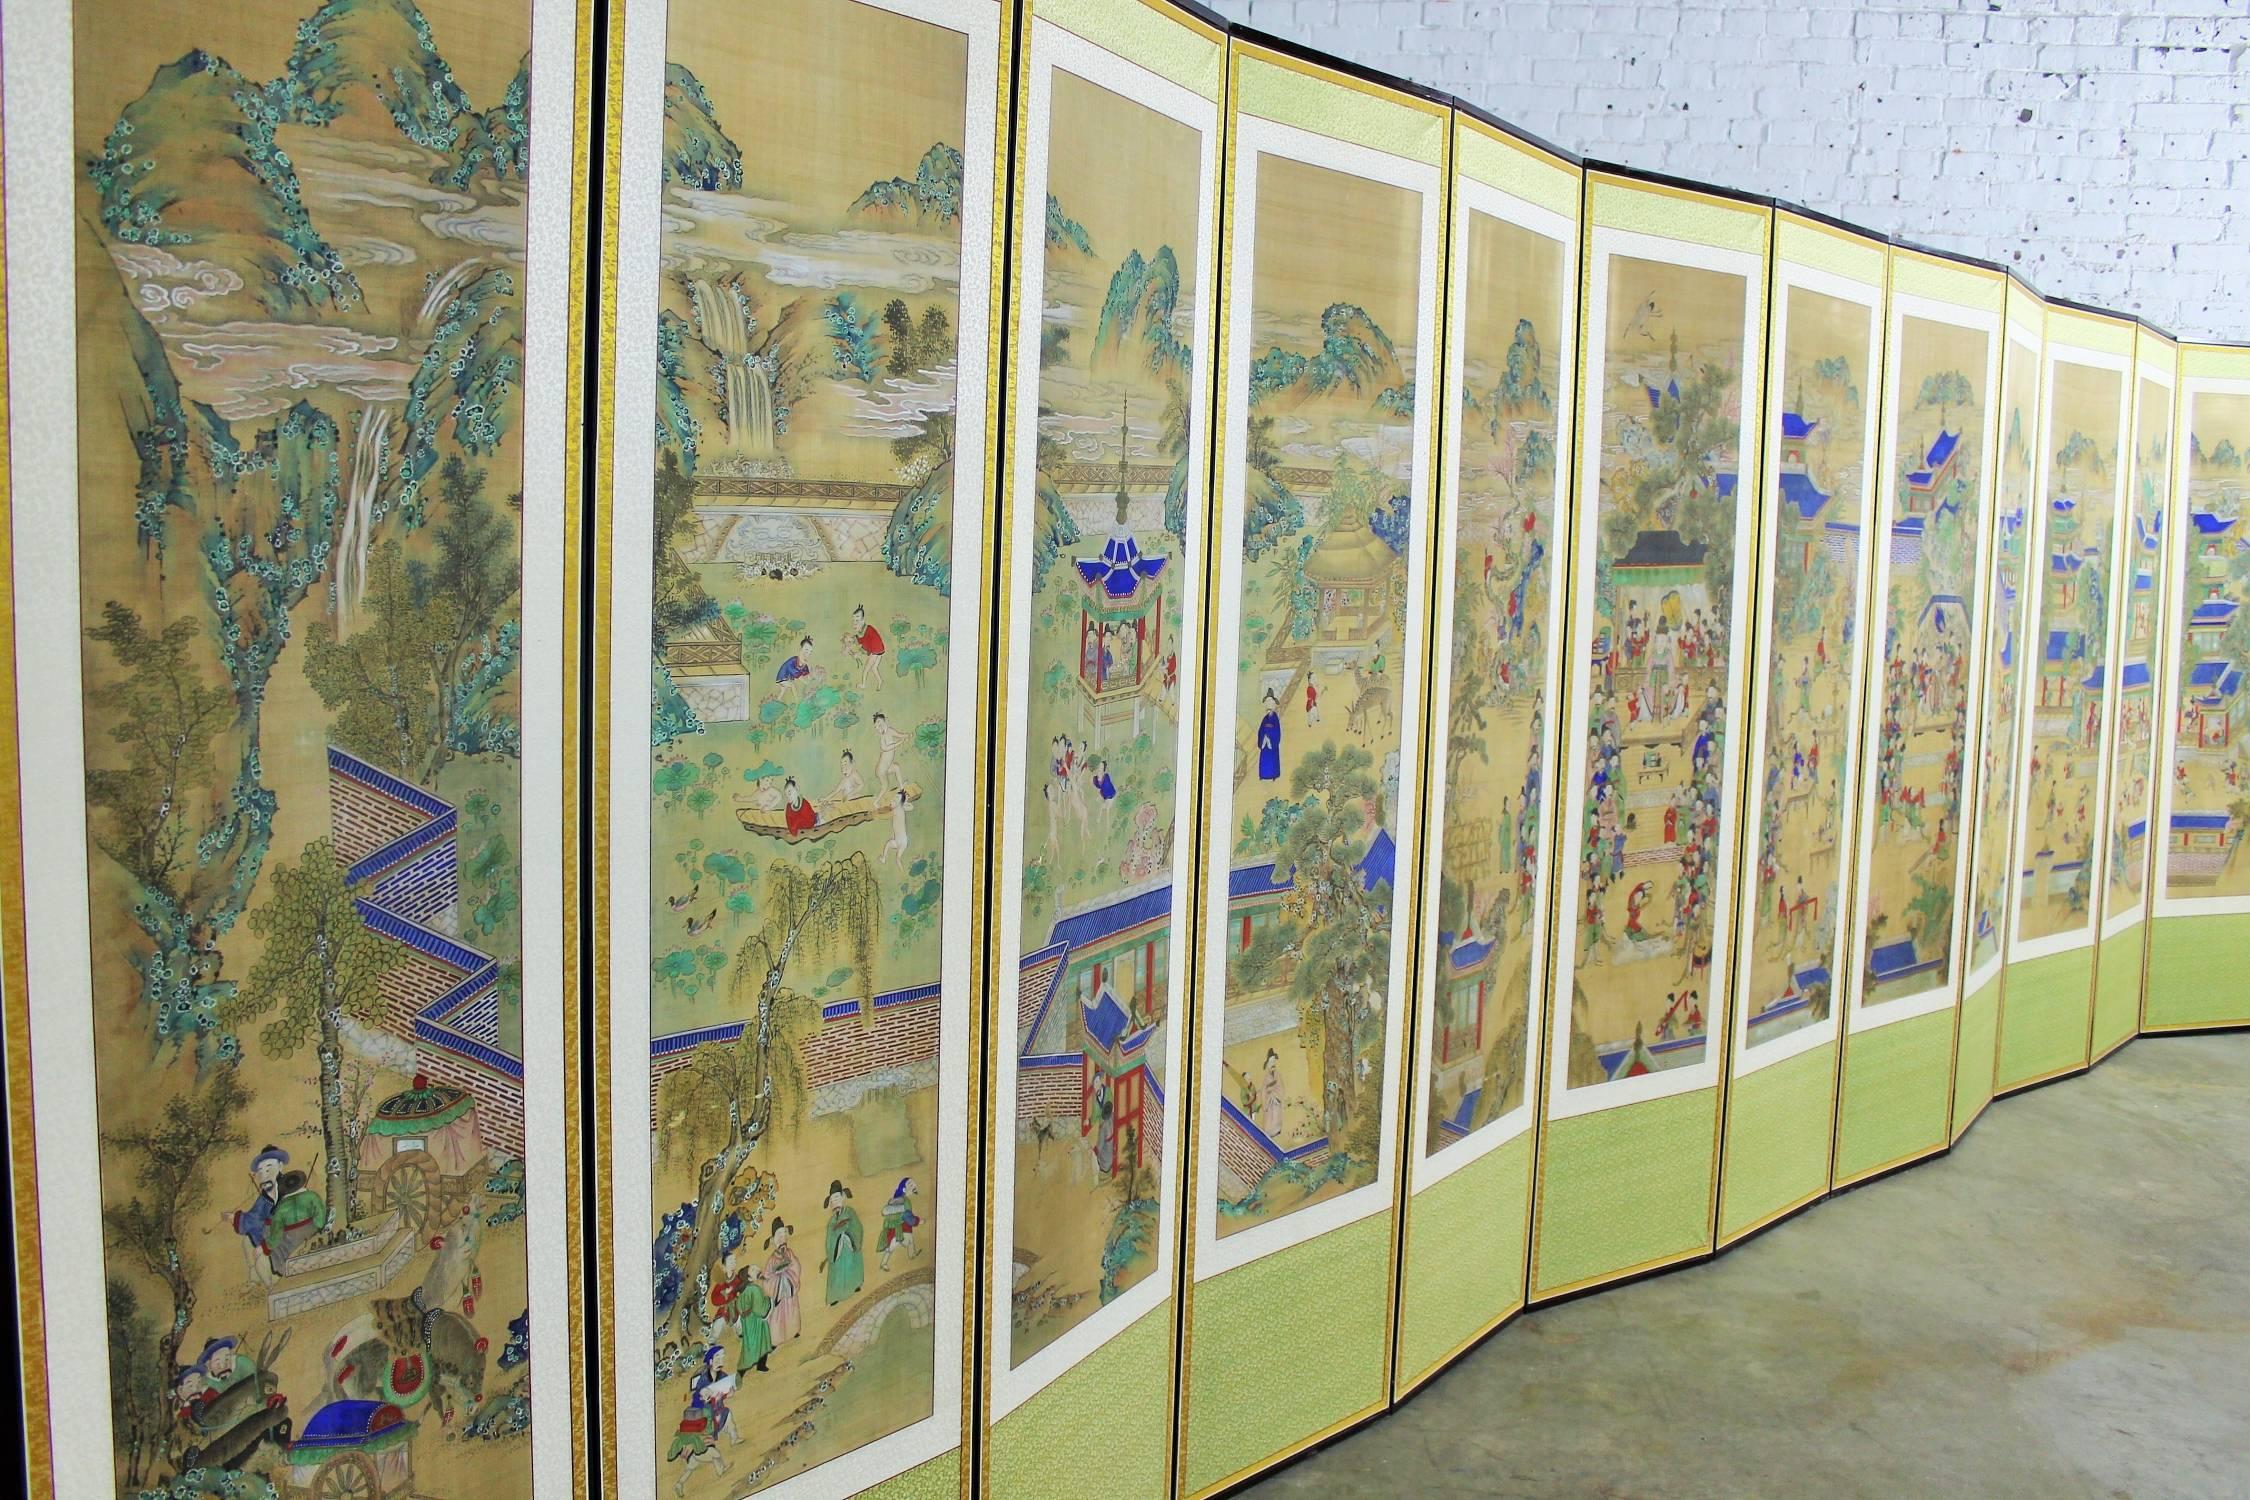 Incredible 19th century Korean folding screen with 12 hand-painted silk panels of bright blue and red and yellow and green. In wonderful antique condition. 

This 19th century Korean screen is a magnificent piece of art! Comprised of 12 panels of